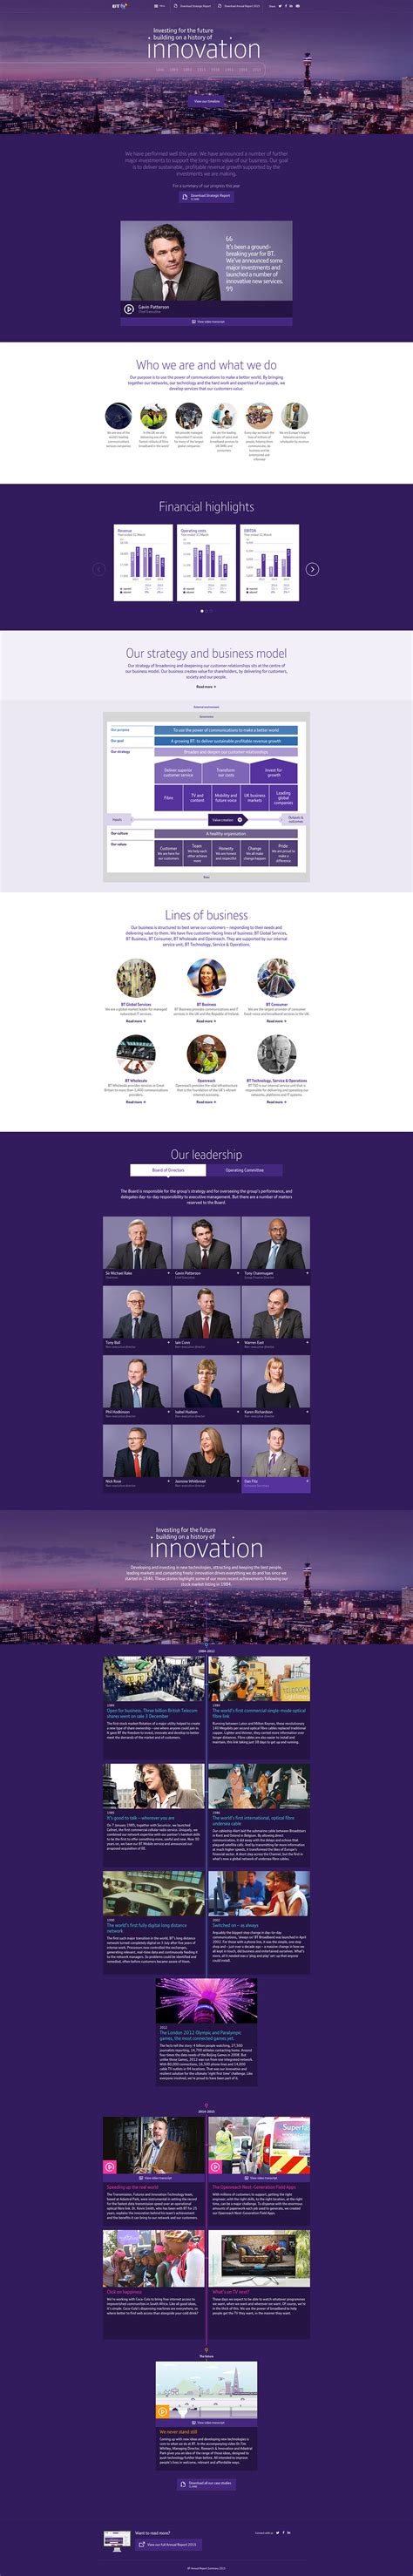 Annual report 2015 | 001. BT Annual Report Review 2015 - One Page Website Award